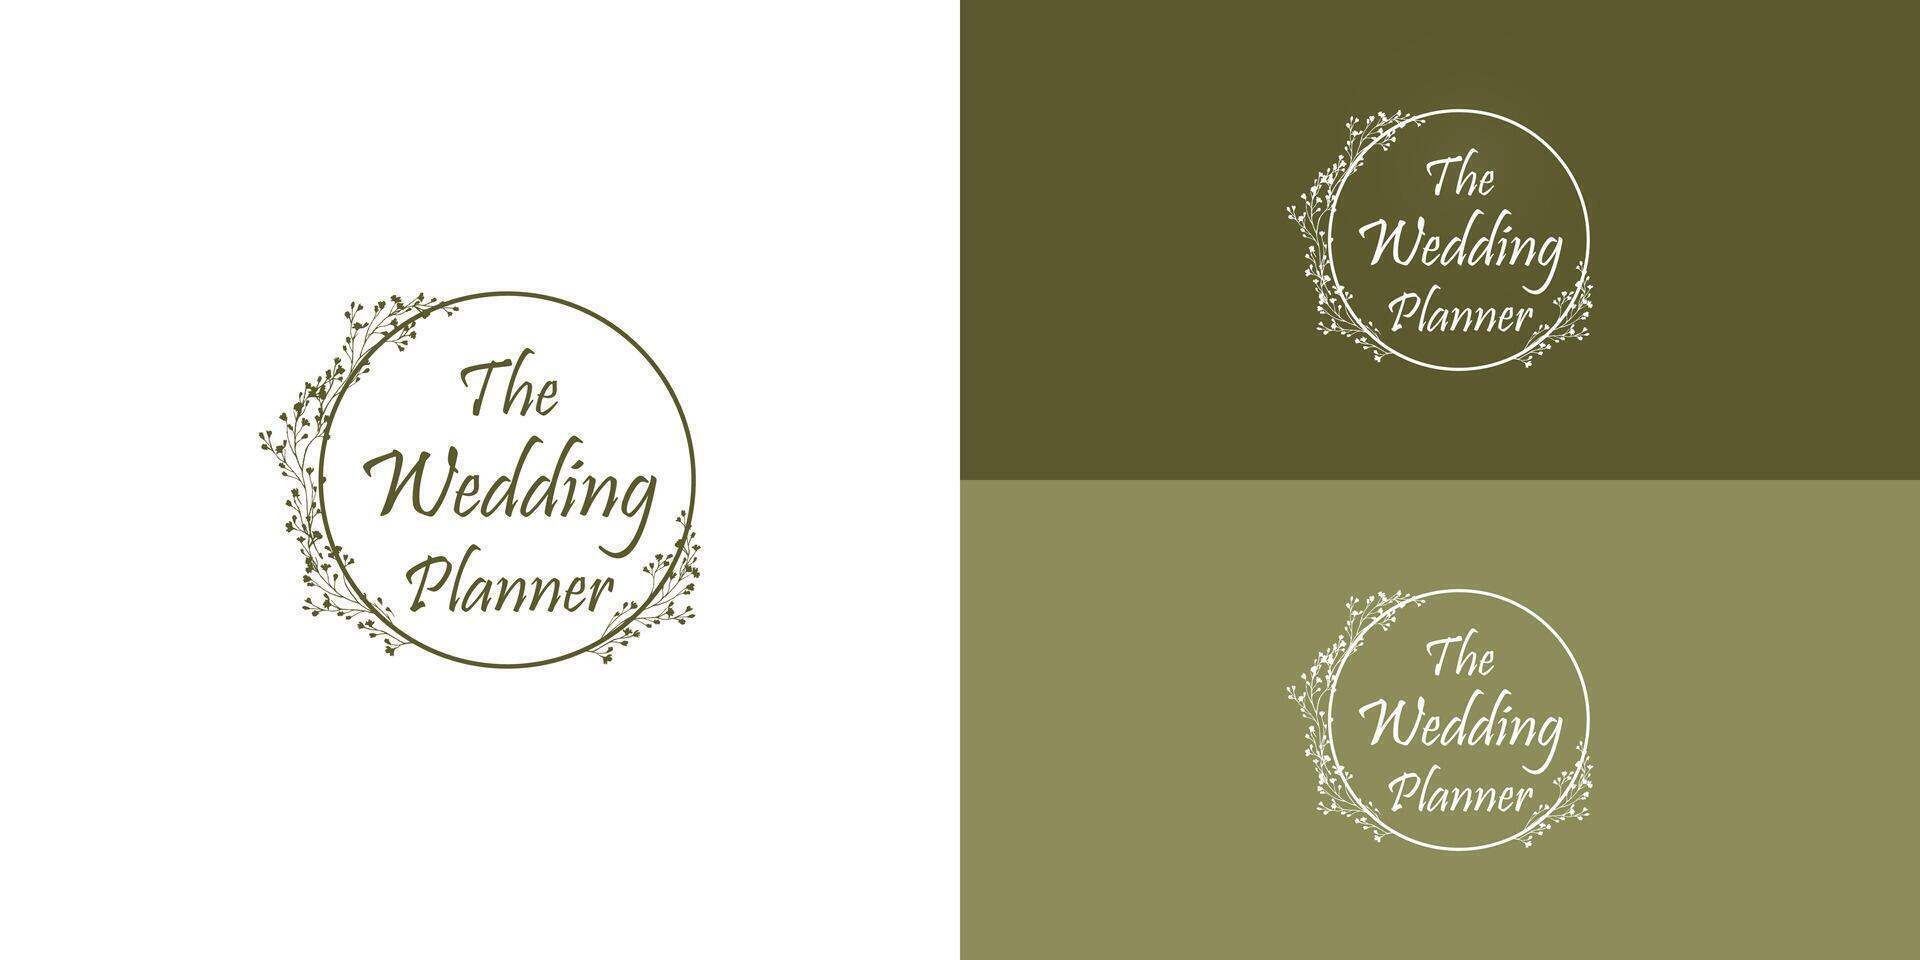 Wedding planner, and wedding organizer logotype design presented with multiple background colors. Simple and elegant wedding planner company logo with circle flower decoration vector